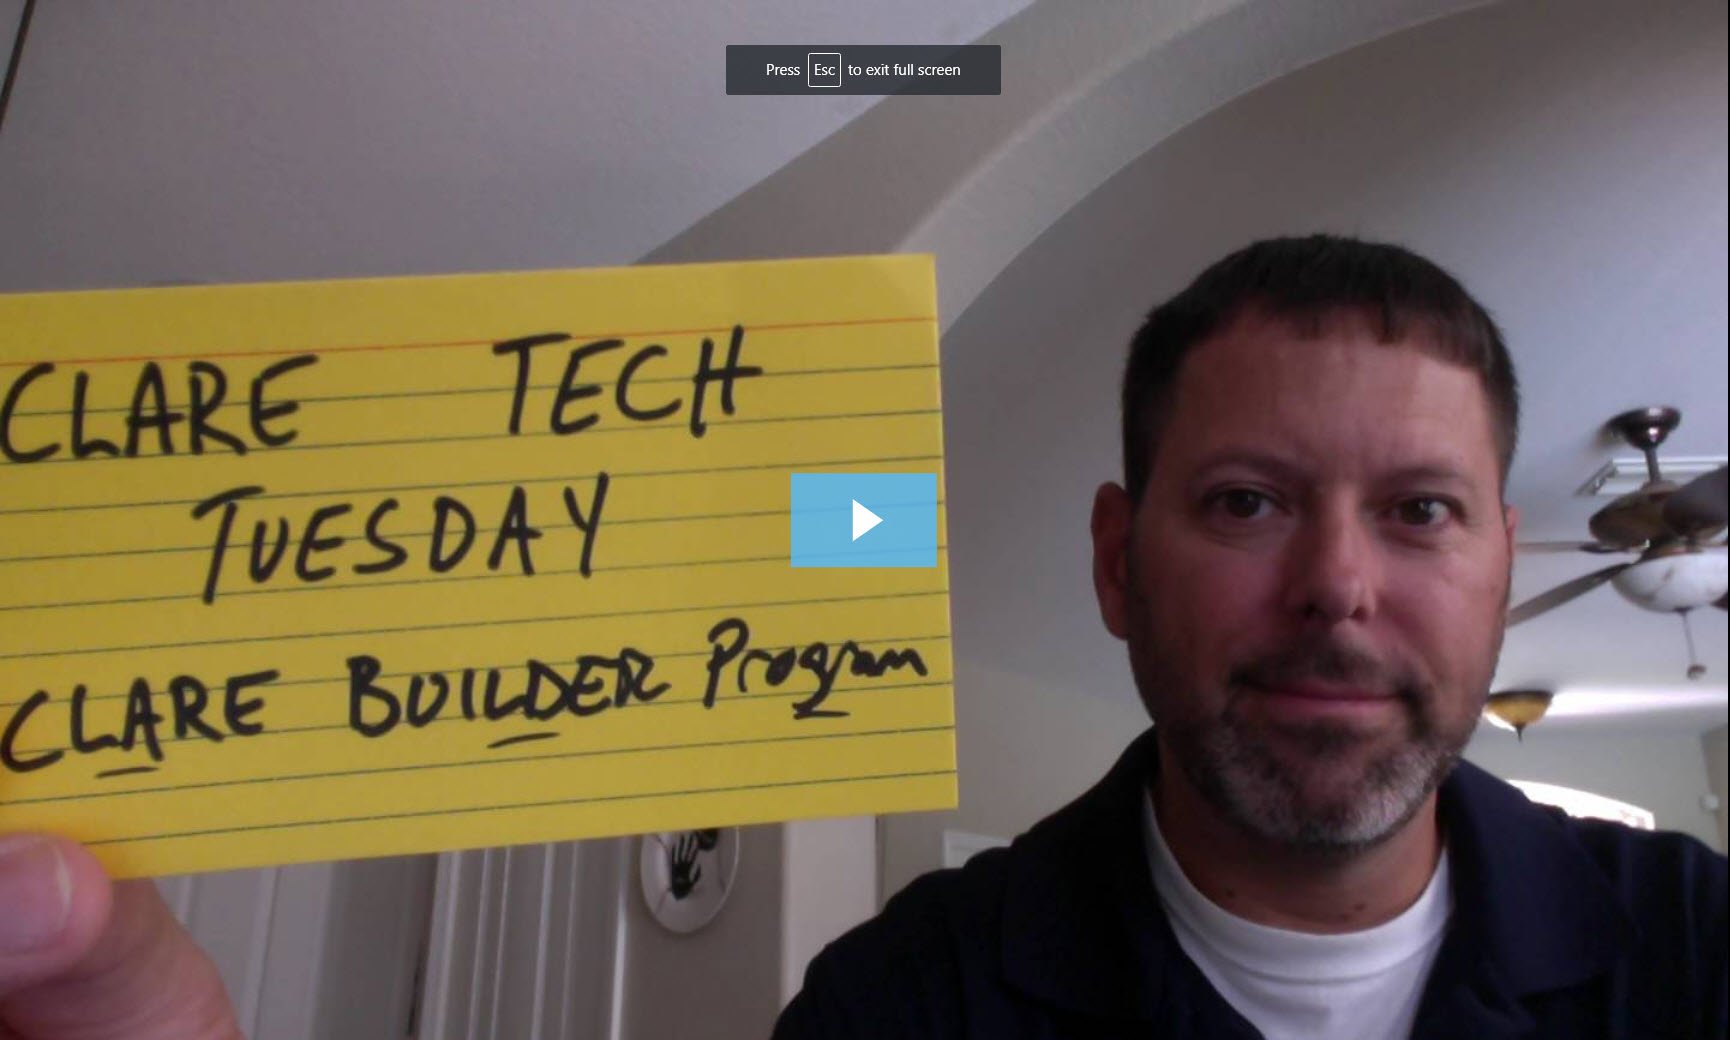 Clare Tech Tuesday: Clare Builder Program Overview